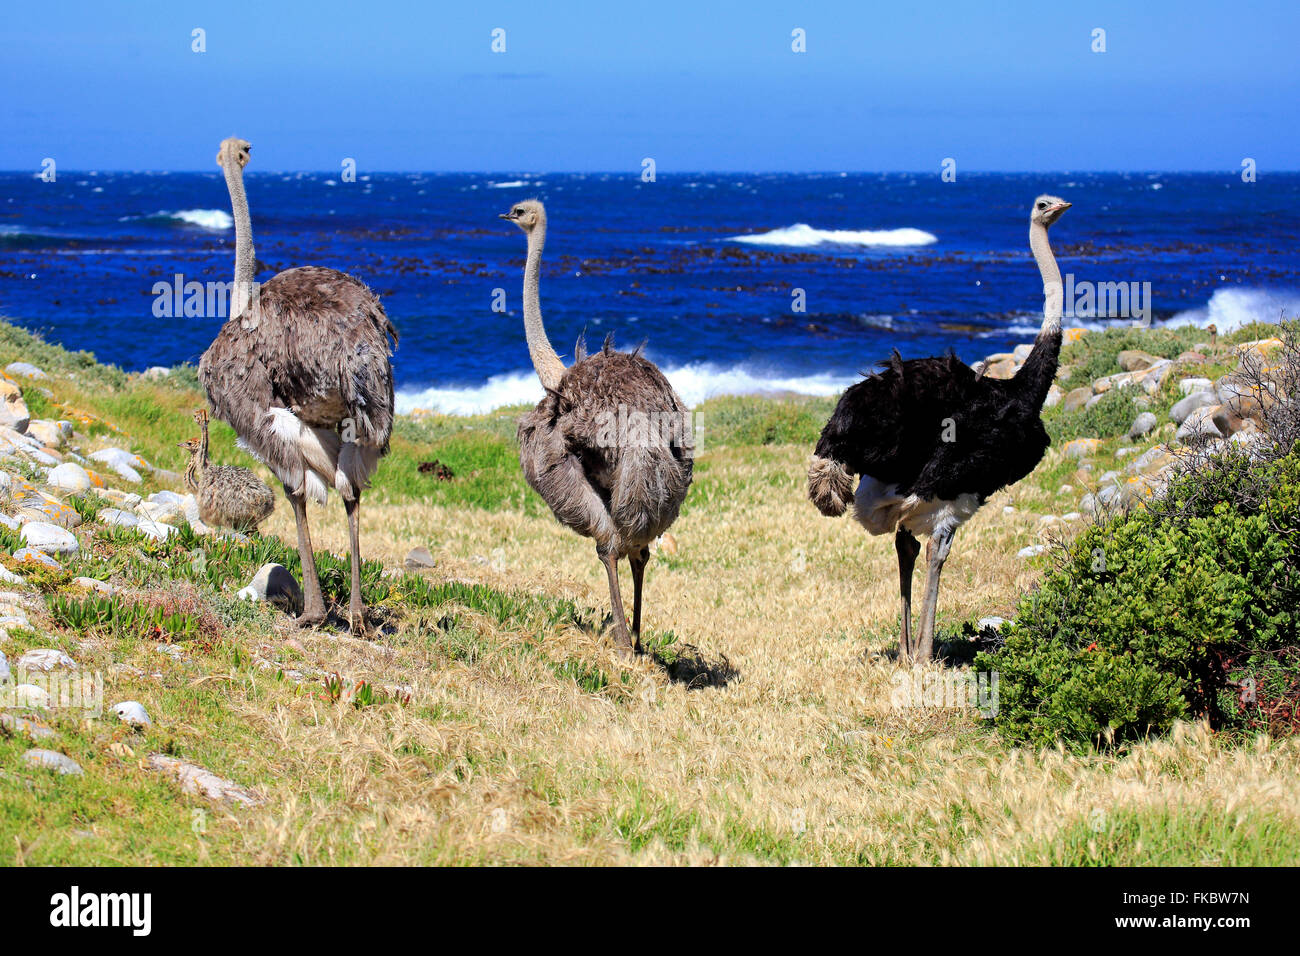 South African Ostrich, adult male and females, group, Cape of the Good Hope, Table Mountain Nationalpark, Western Cape, South Africa, Africa / (Struthio camelus australis) Stock Photo